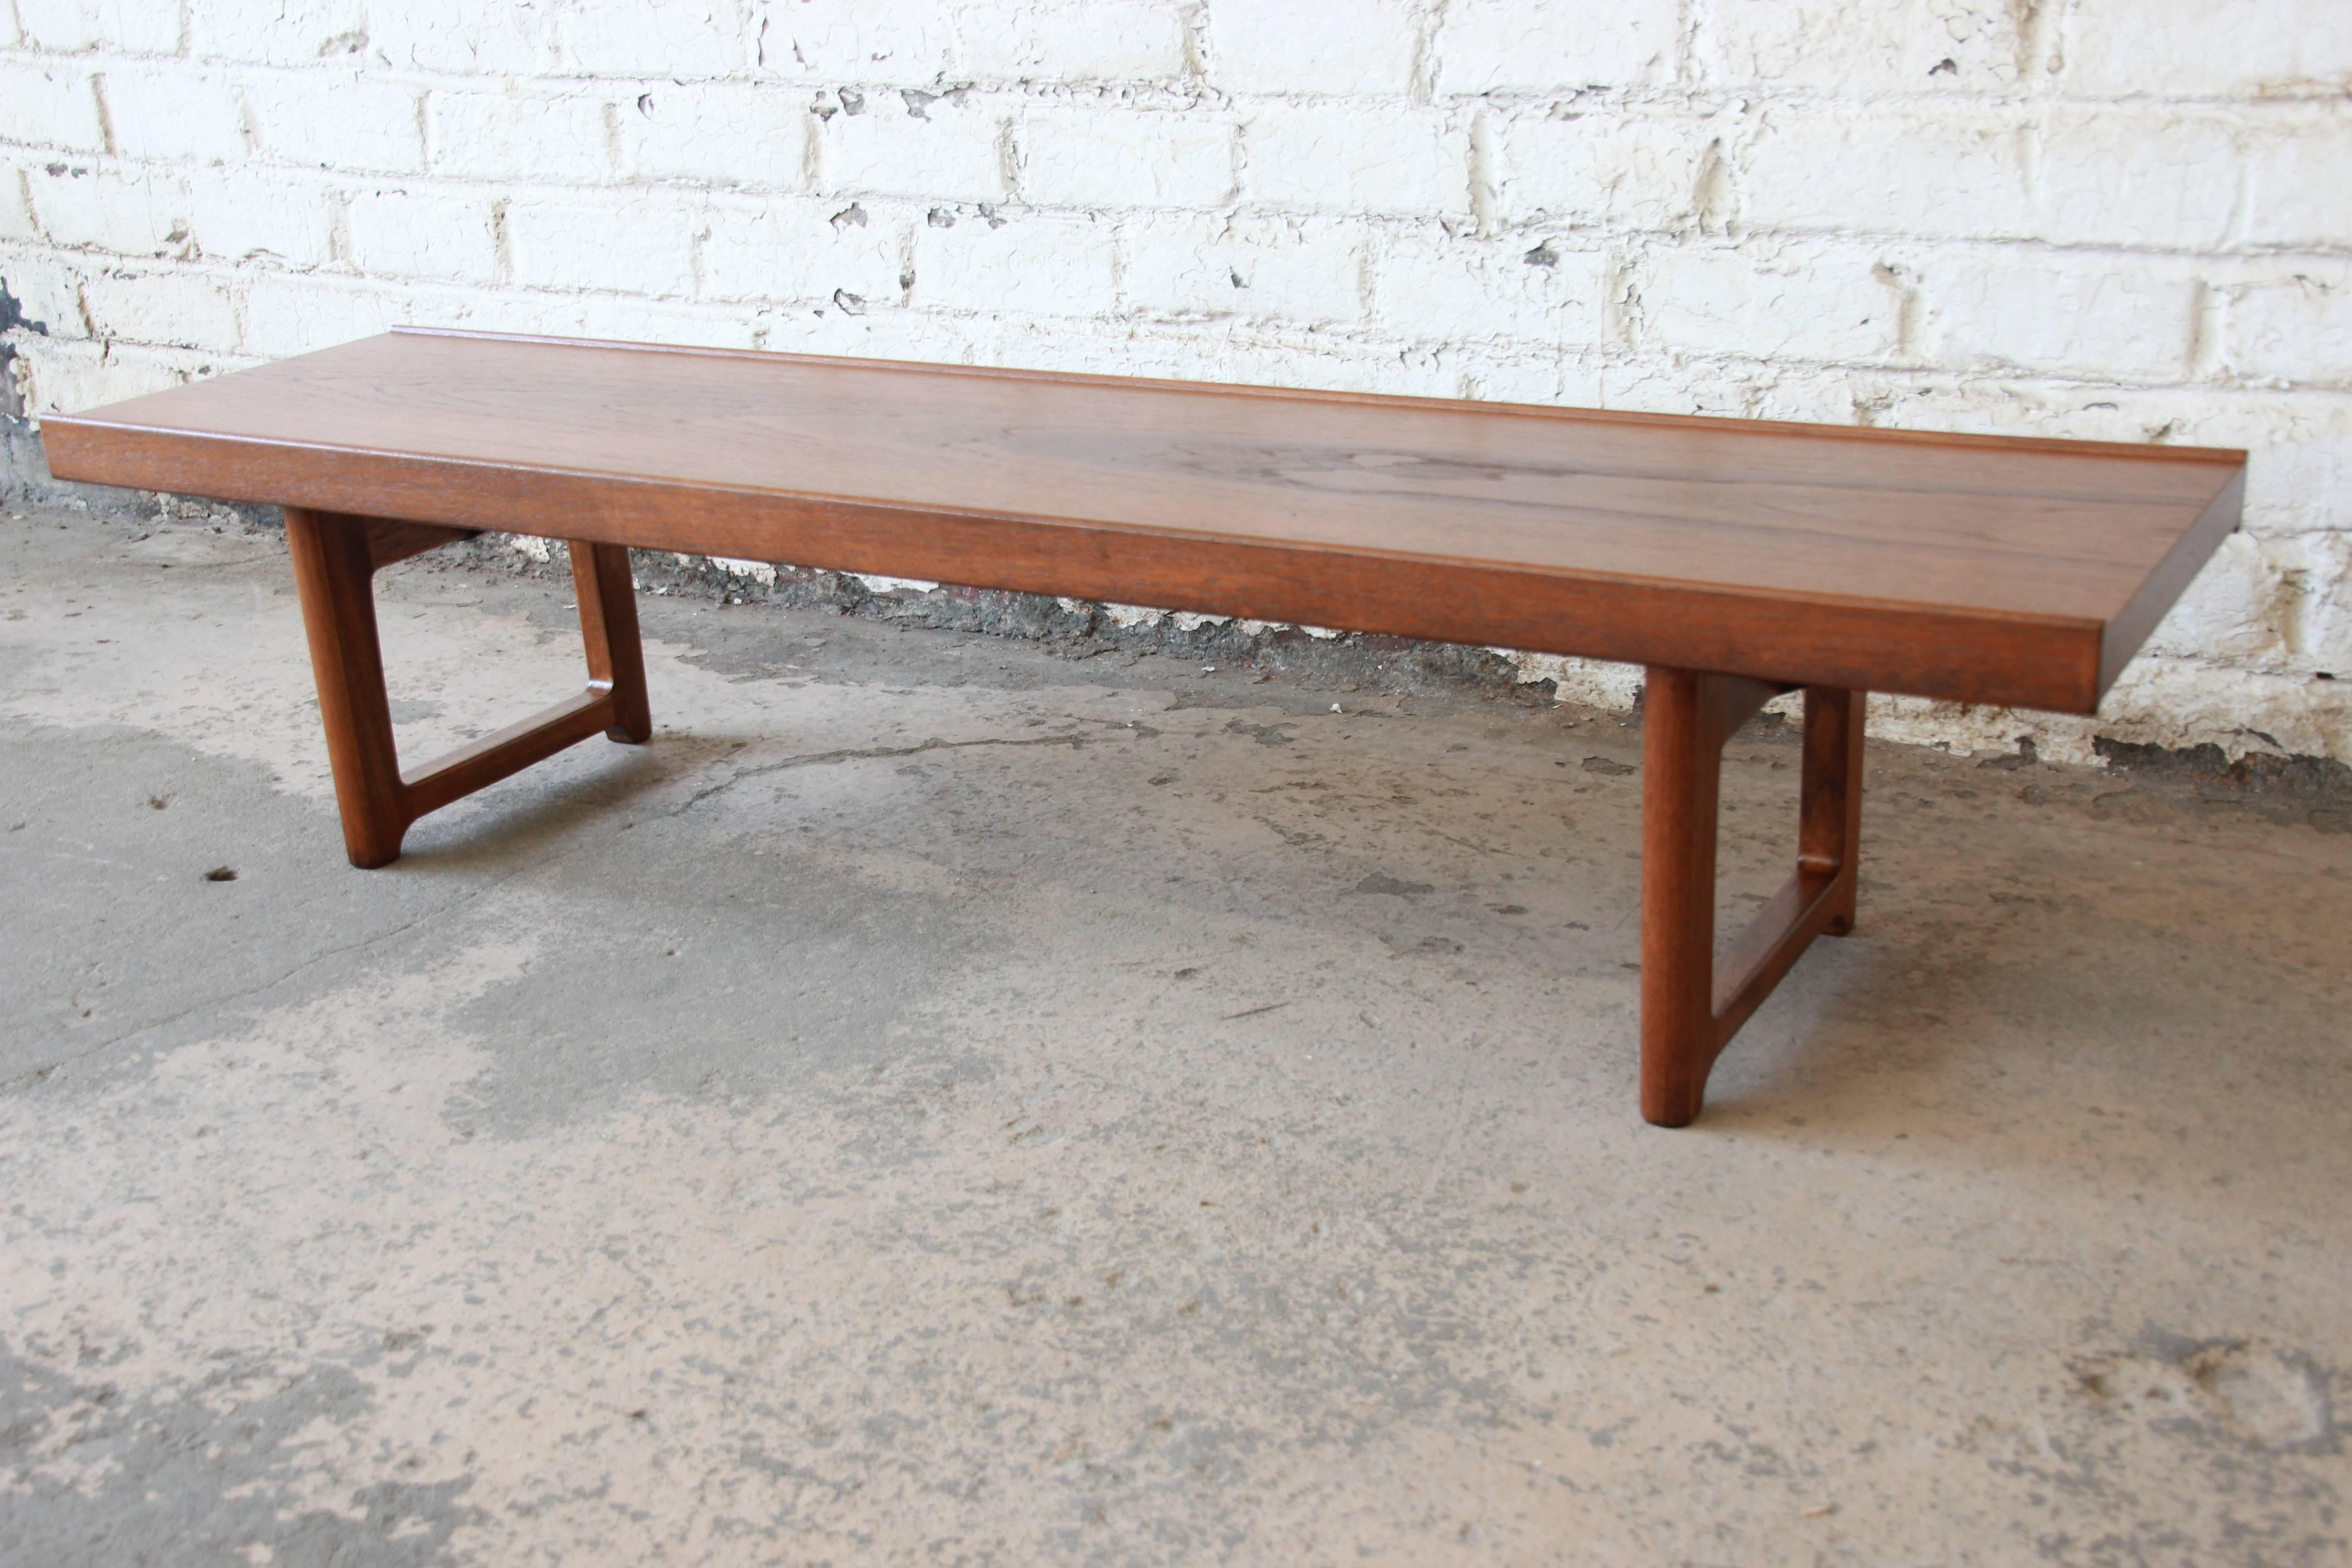 Offering a newly restored Torbjørn Afdal for Bruksbo teak bench or coffee table. The Norwegian made bench has mid Scandinavian lines with a distinct teak wood grain. The bench is newly refinished and in excellent condition.